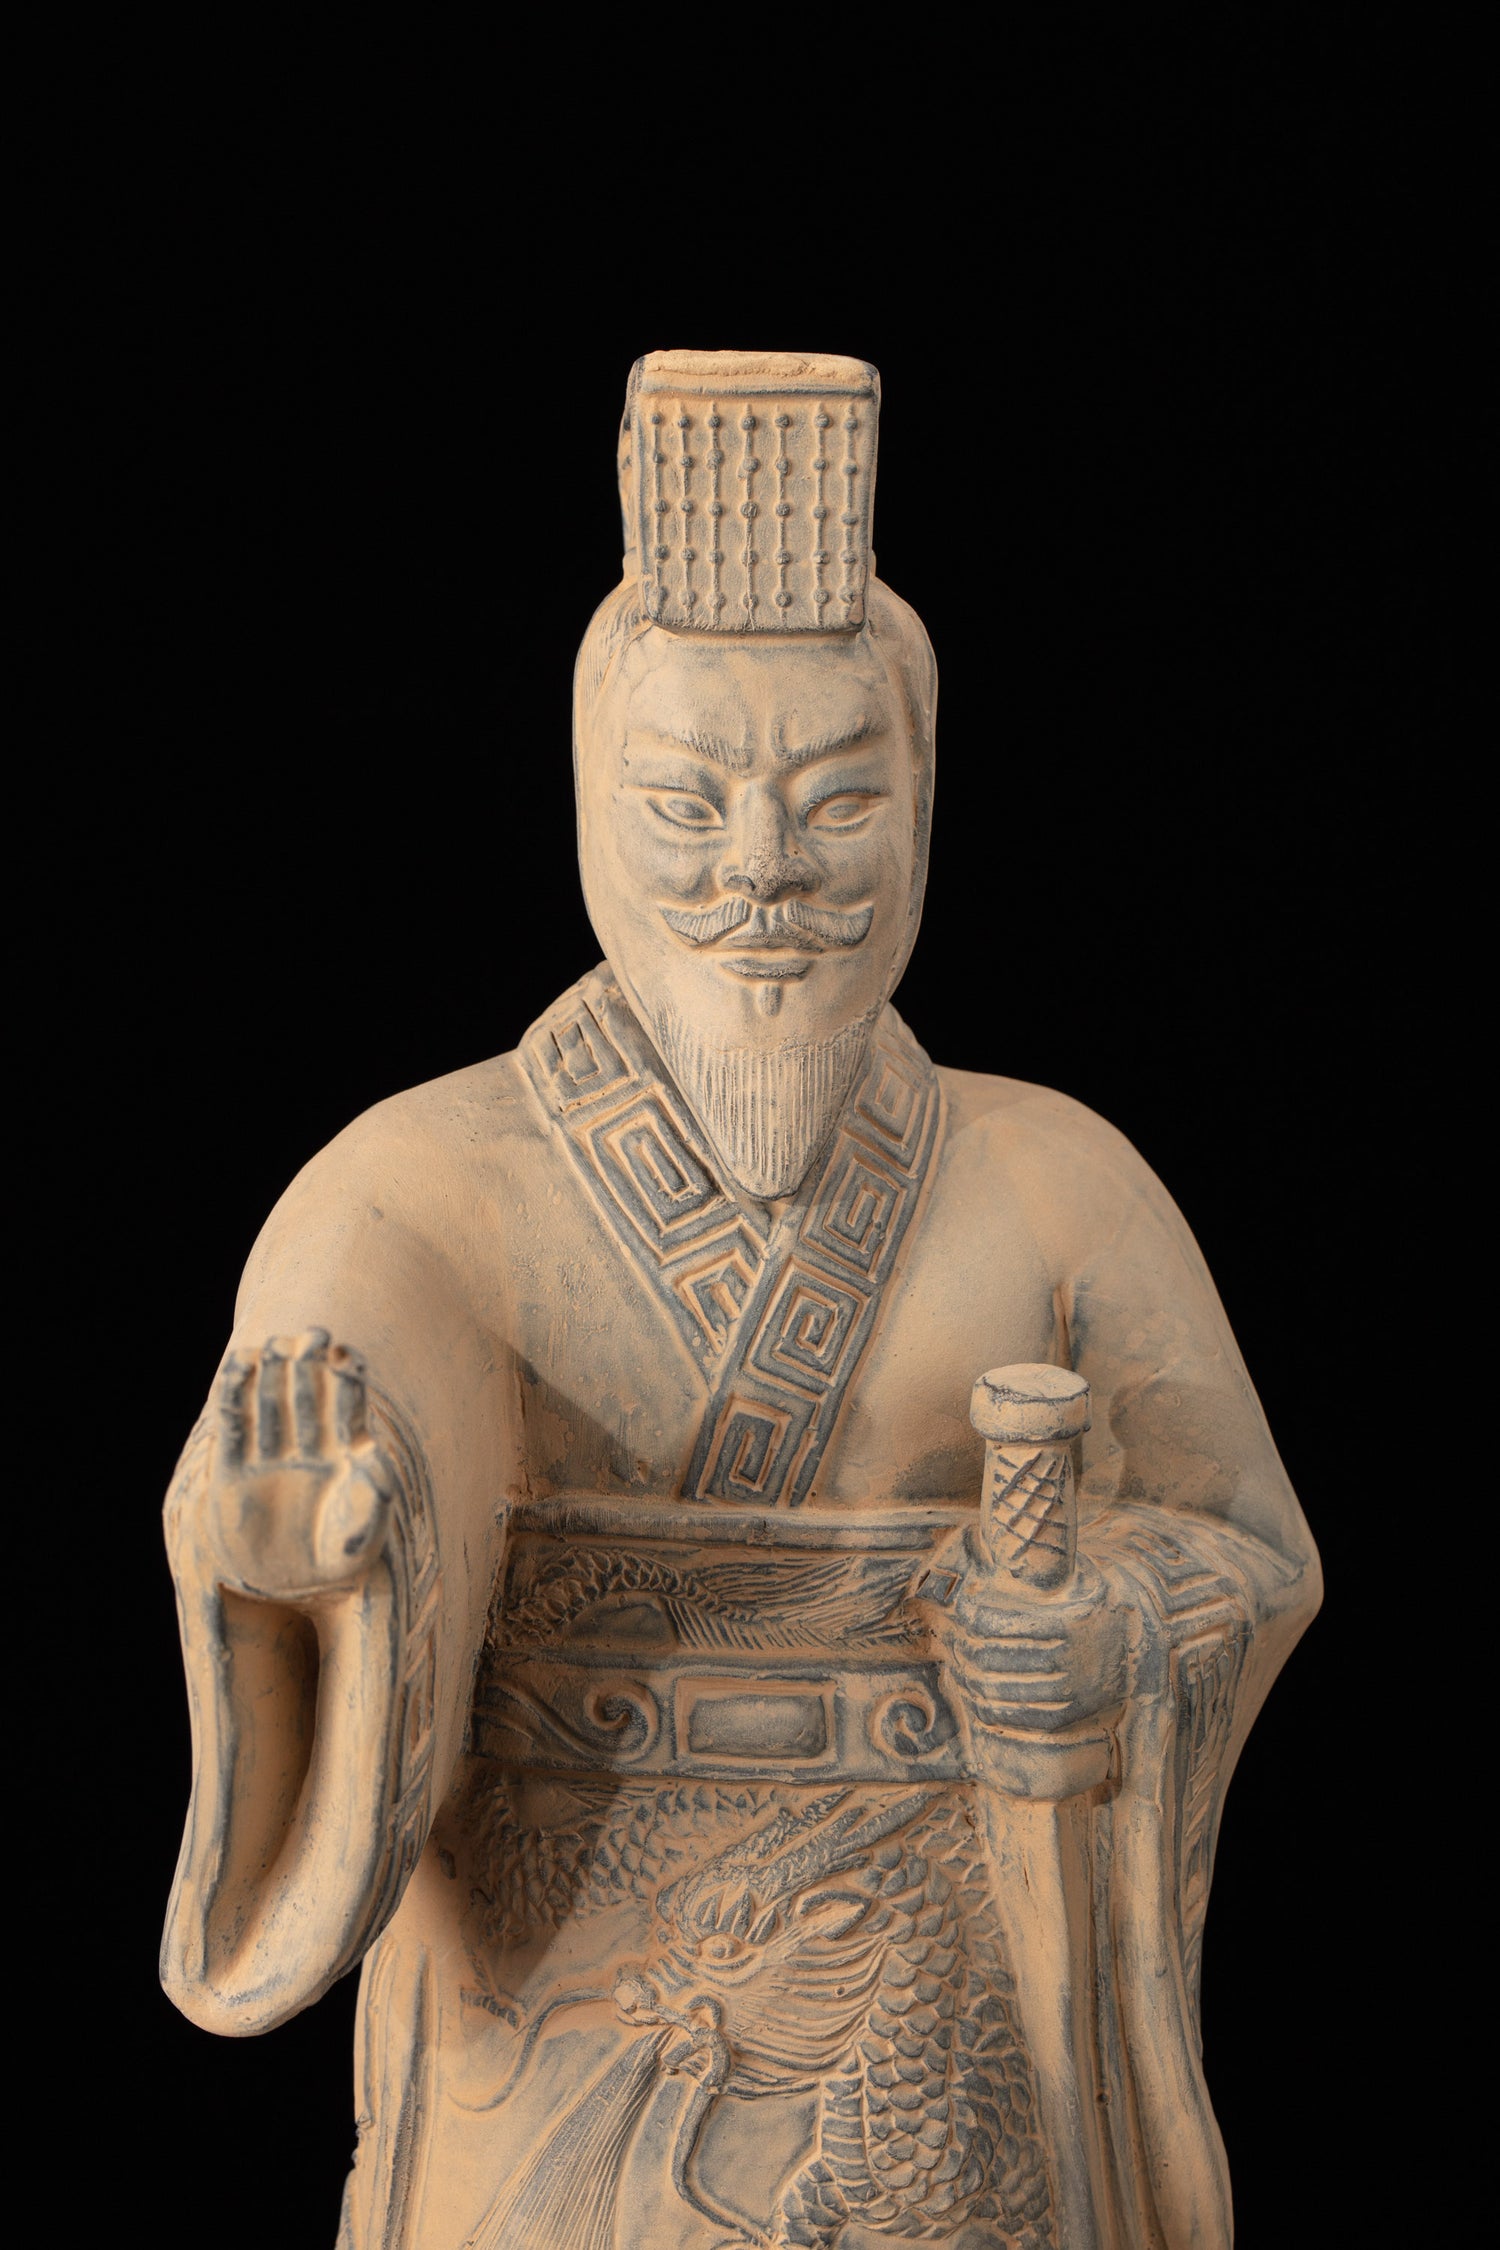 Clayarmy-terracotta army-Emperor Qin's Terracotta Army, commissioned as an afterlife army, symbolizes military might and cultural zenith. Learn about Qin Shi Huang's achievements, including unifying China, constructing the Great Wall, and standardizing units and currencies.